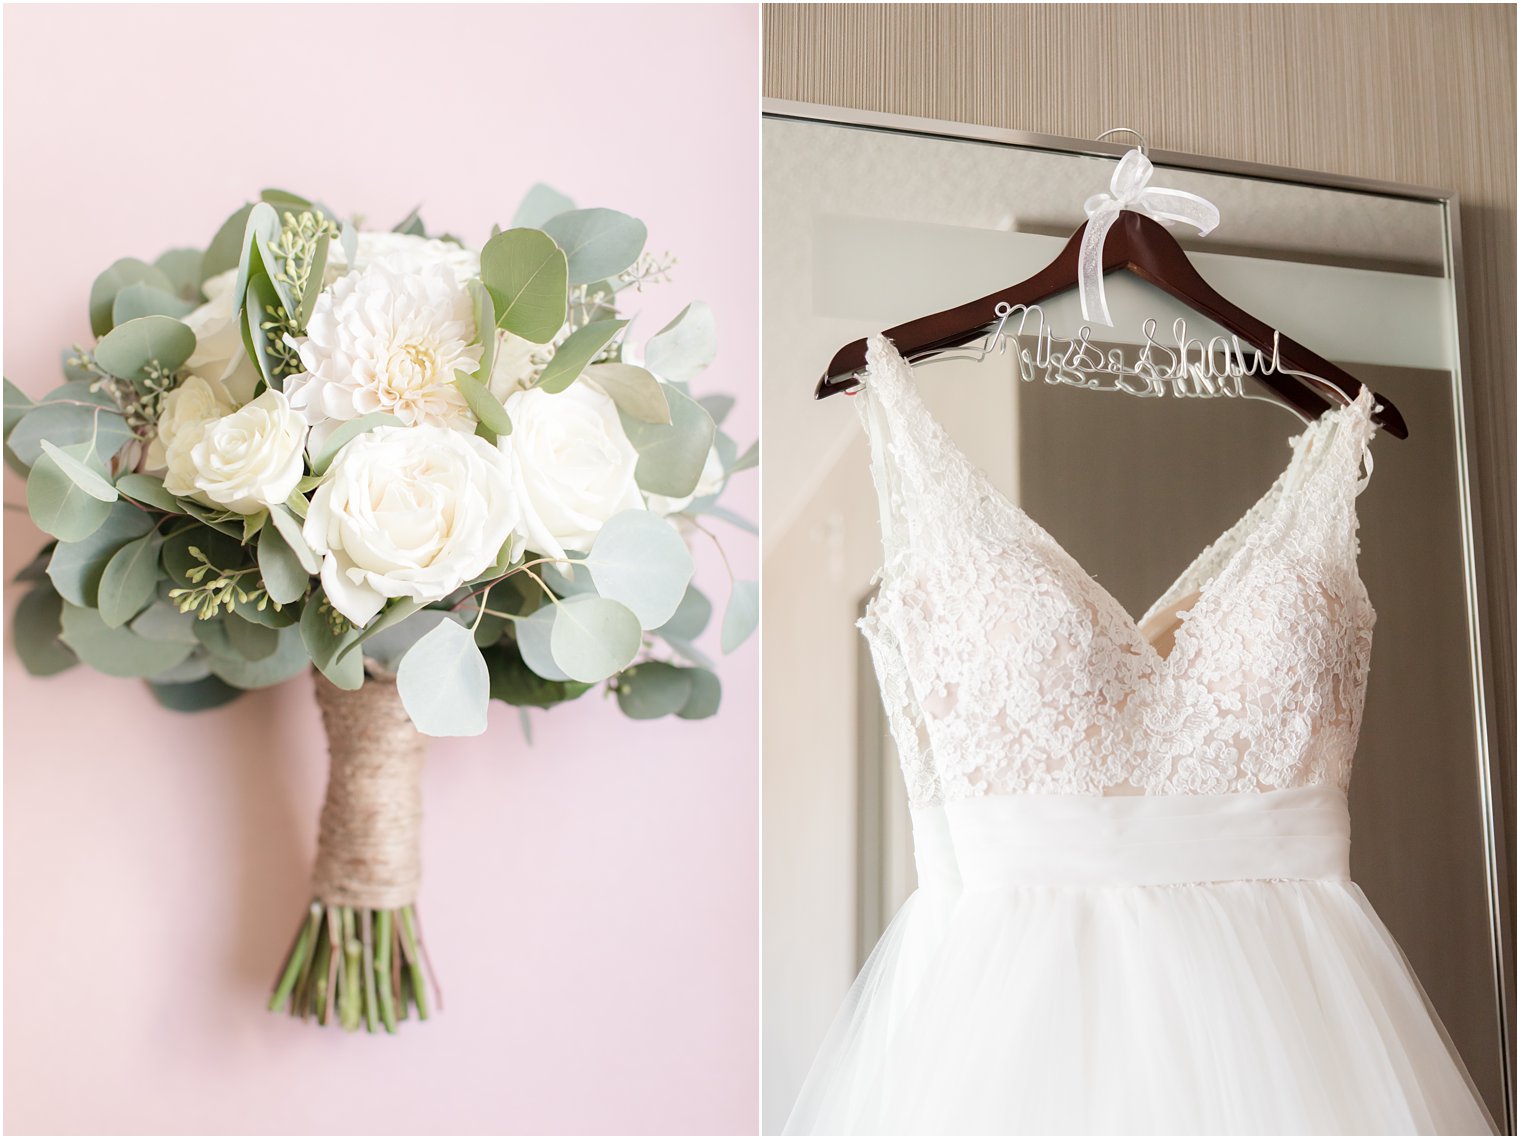 Bridal bouquet and wedding gown on custom hanger